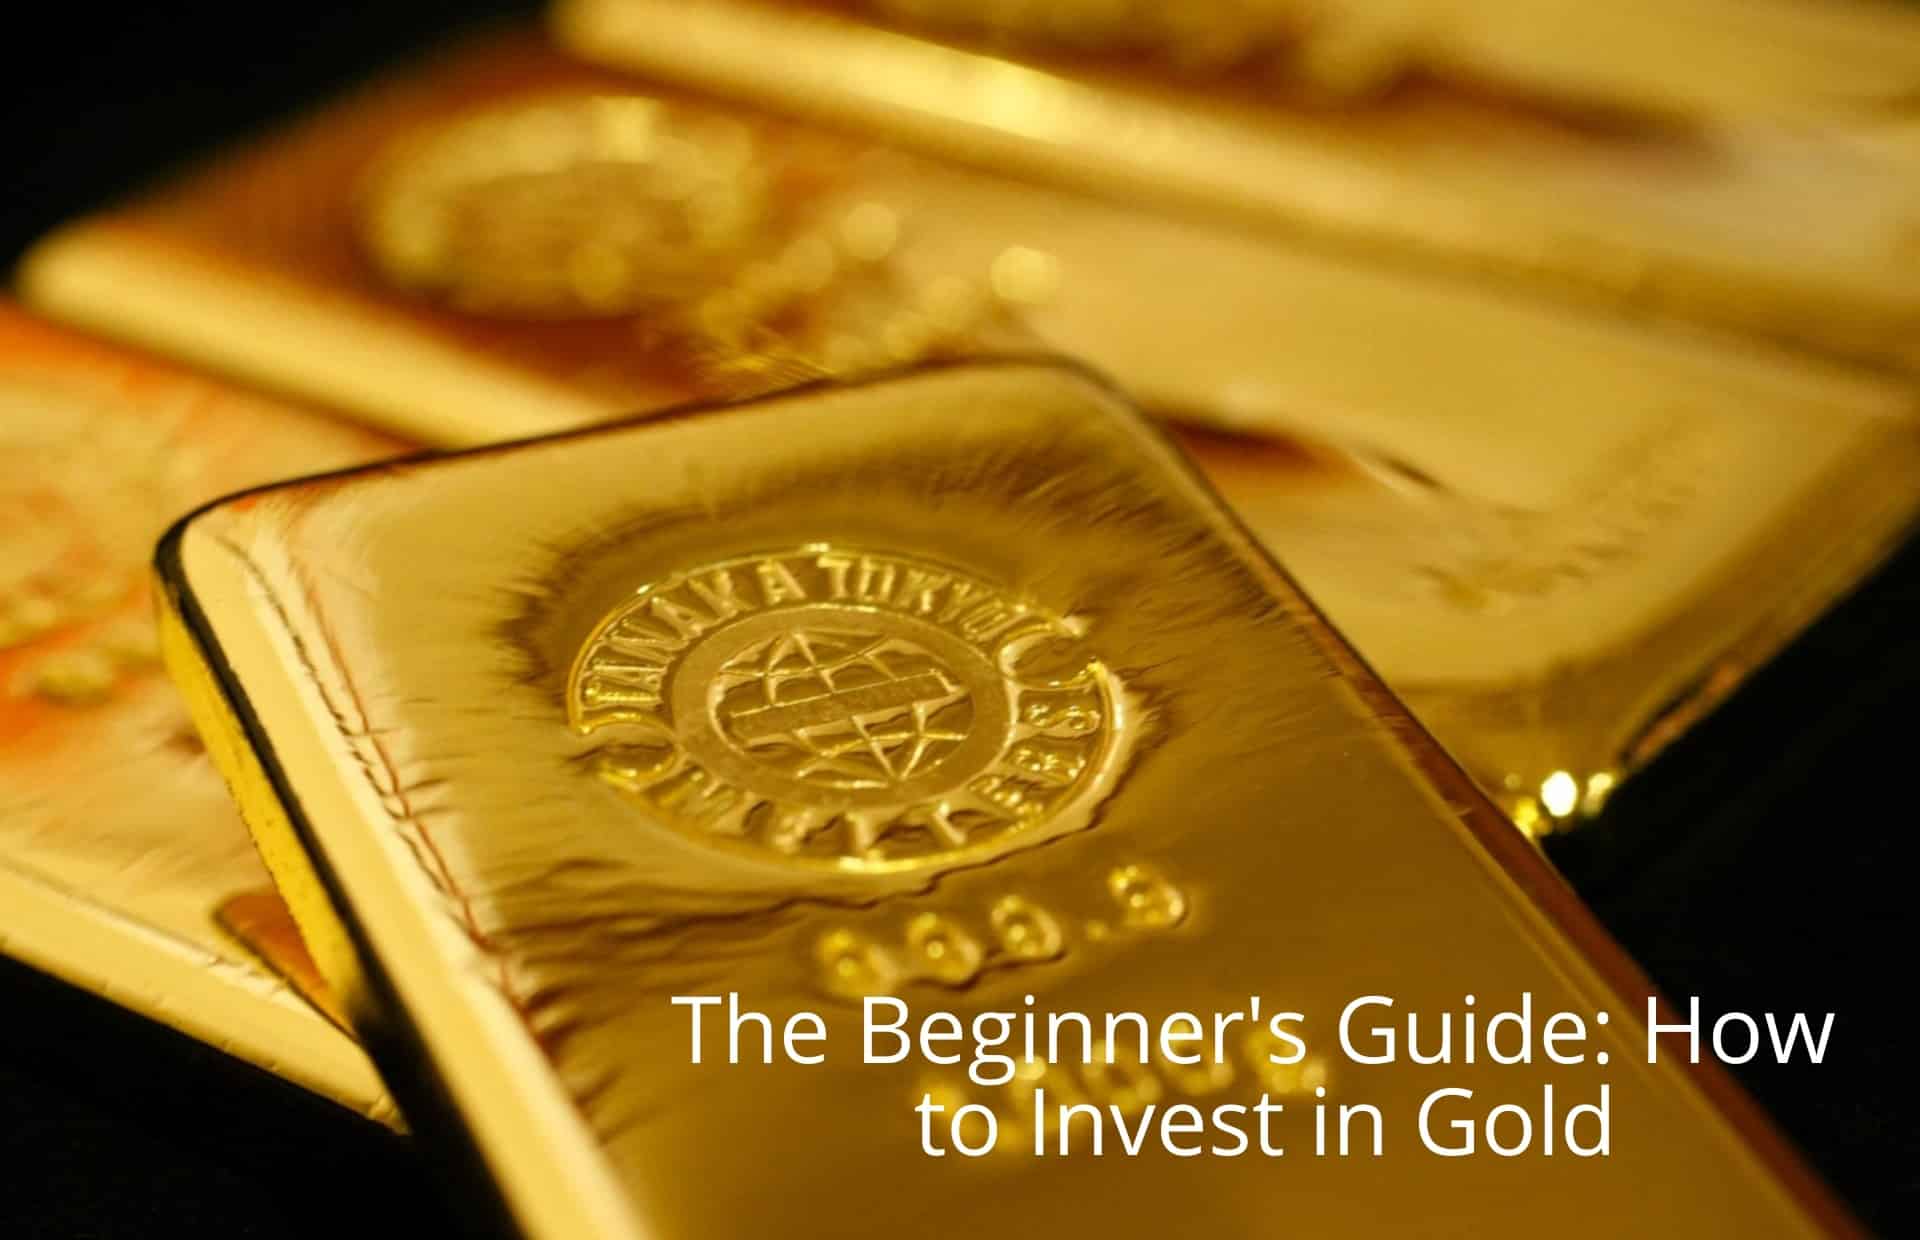 The Beginner's Guide: How to Invest in Gold